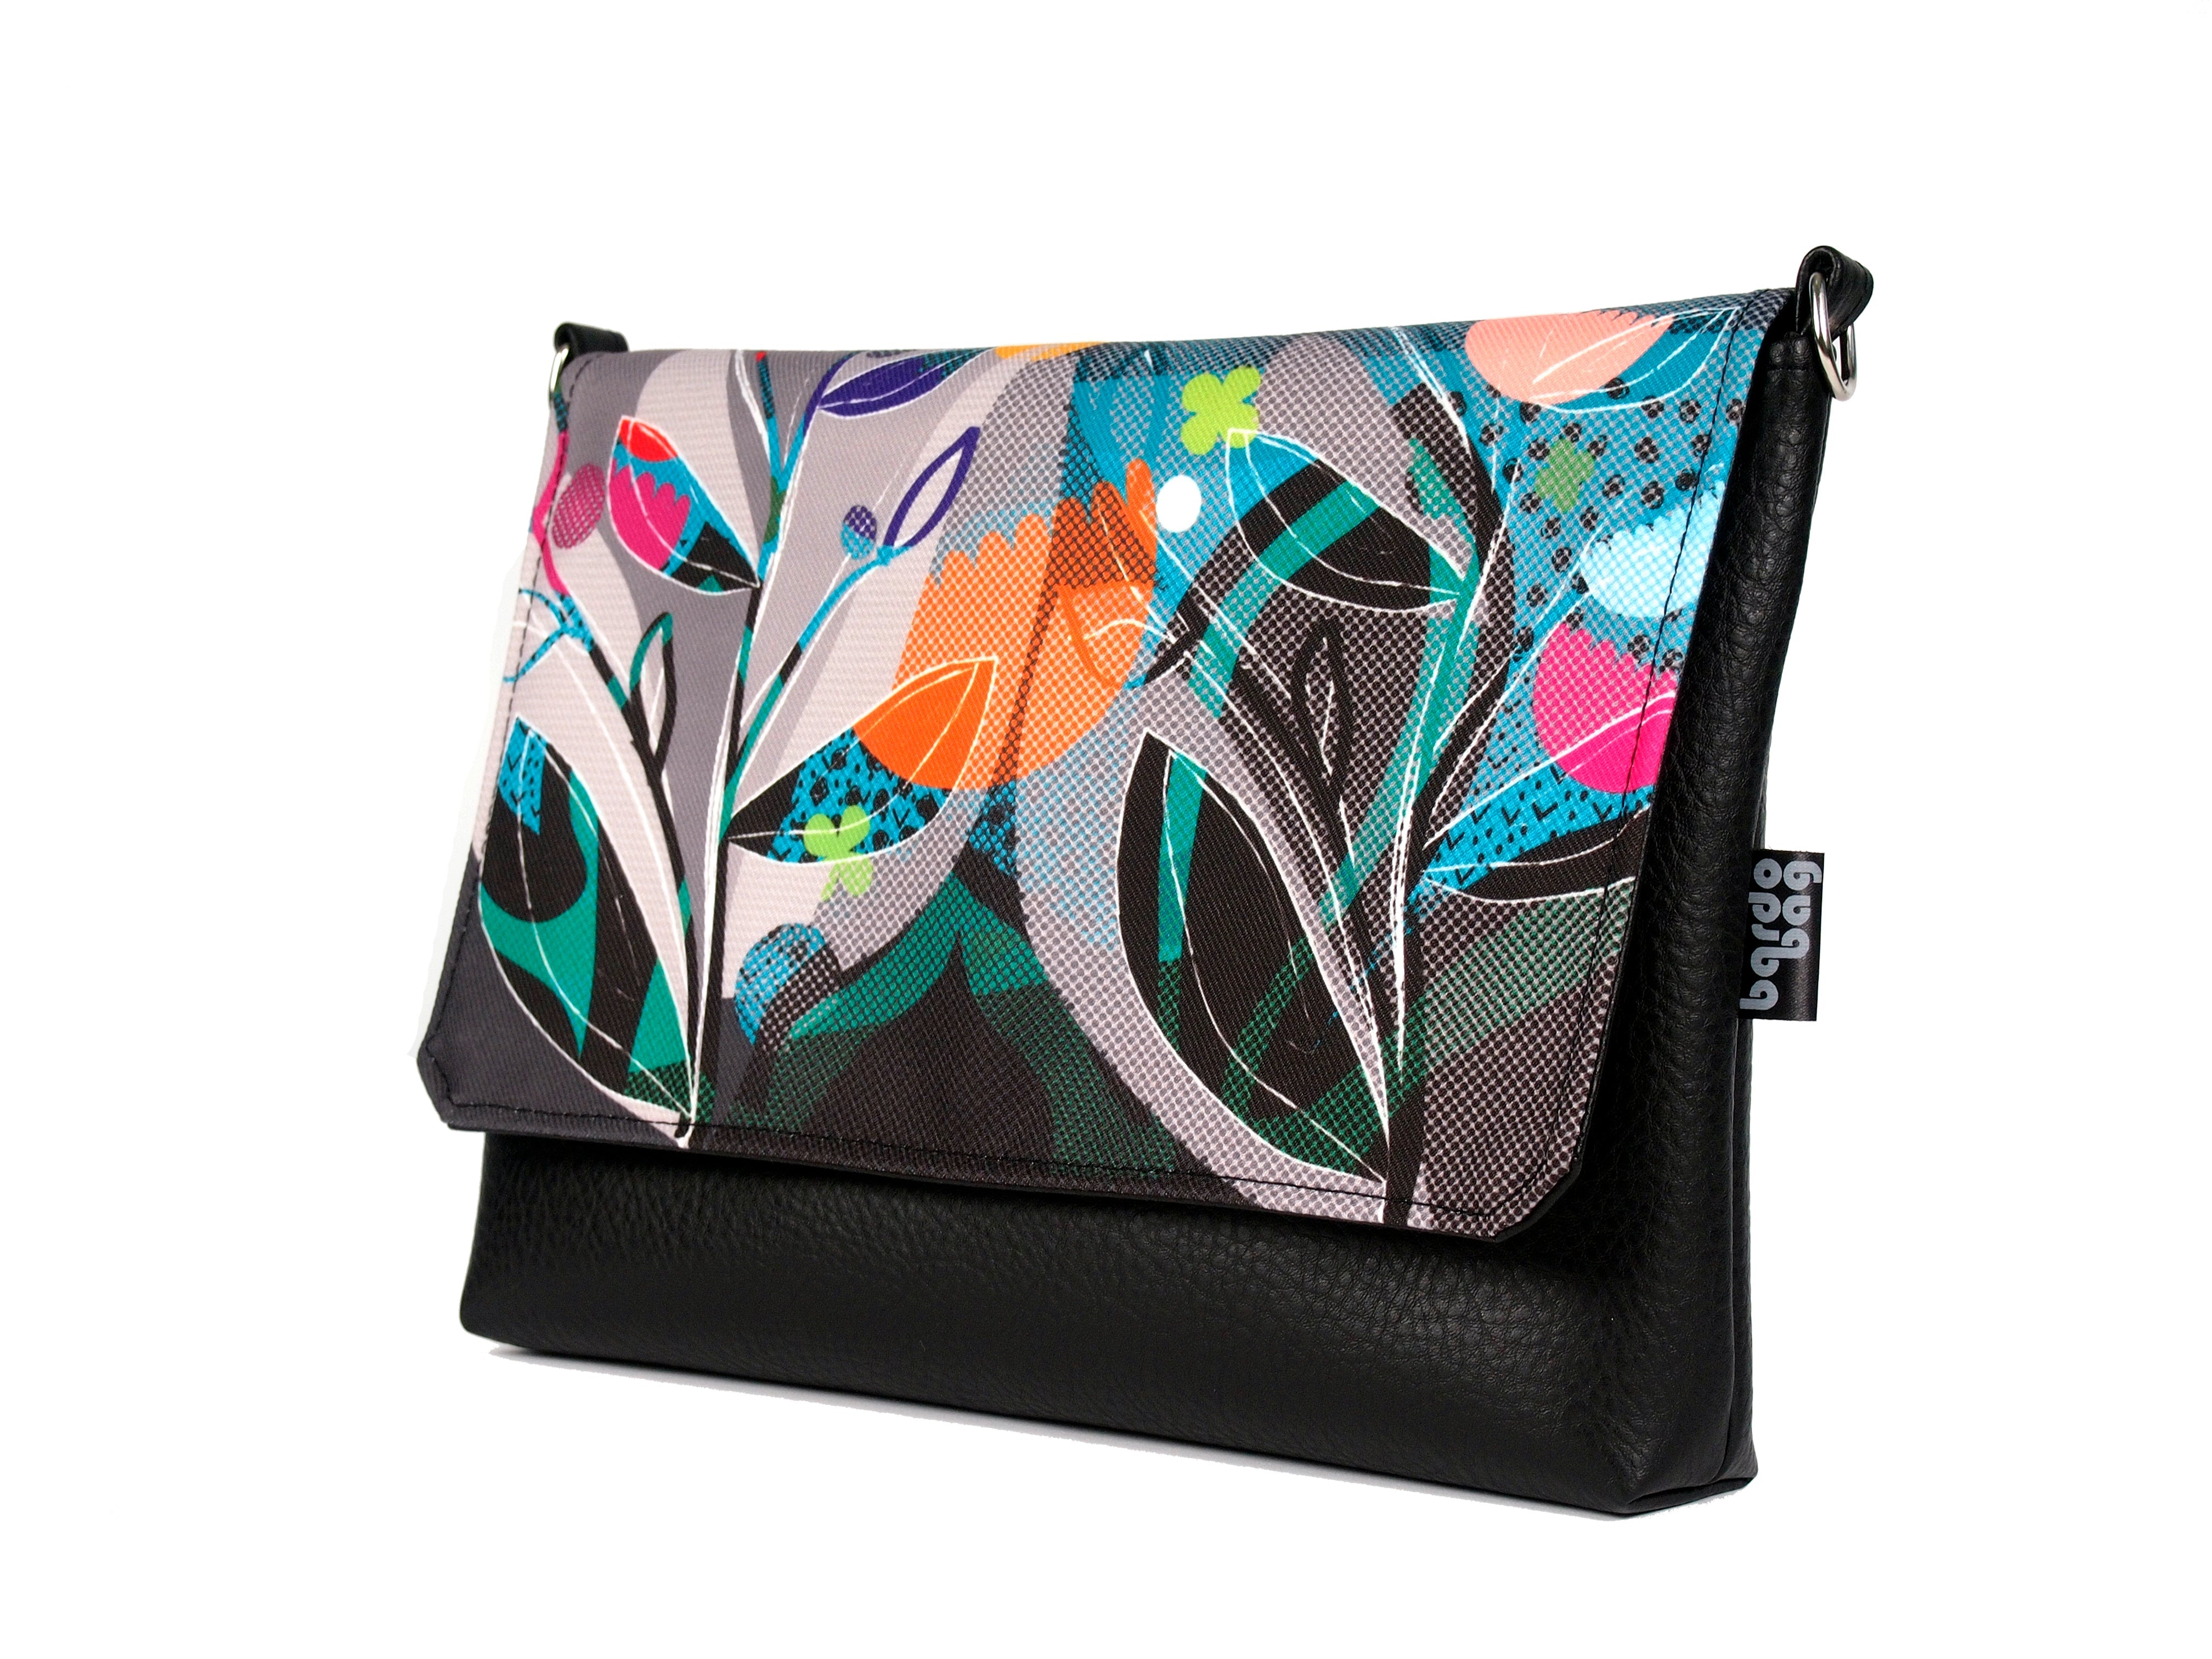 Bardo small bag - Waiting for the dawn - Premium Bardo small bag from BARDO ART WORKS - Just lvabstract, art bag, Art Print, autumn, black, colors, dark blue, floral, gift, graphic, green, handemade, orange, painted patterns, purple, urban style, vegan leather, white, woman, yellow55.00! Shop now at BARDO ART WORKS